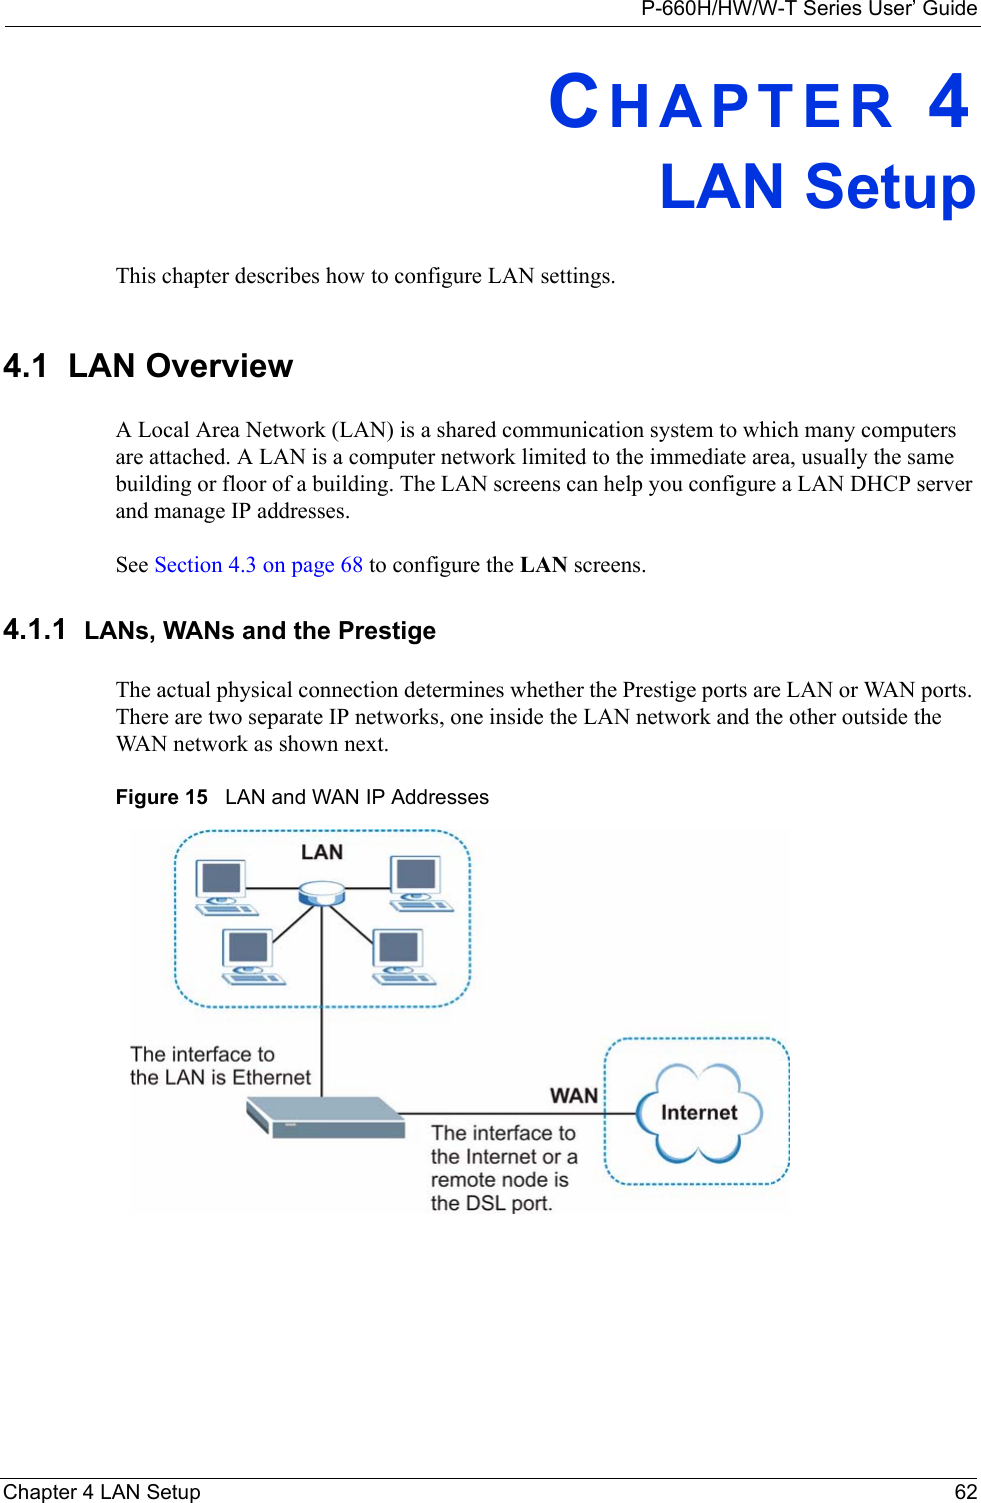 P-660H/HW/W-T Series User’ GuideChapter 4 LAN Setup 62CHAPTER 4LAN SetupThis chapter describes how to configure LAN settings.4.1  LAN Overview A Local Area Network (LAN) is a shared communication system to which many computers are attached. A LAN is a computer network limited to the immediate area, usually the same building or floor of a building. The LAN screens can help you configure a LAN DHCP server and manage IP addresses.  See Section 4.3 on page 68 to configure the LAN screens. 4.1.1  LANs, WANs and the PrestigeThe actual physical connection determines whether the Prestige ports are LAN or WAN ports. There are two separate IP networks, one inside the LAN network and the other outside the WAN network as shown next.Figure 15   LAN and WAN IP Addresses